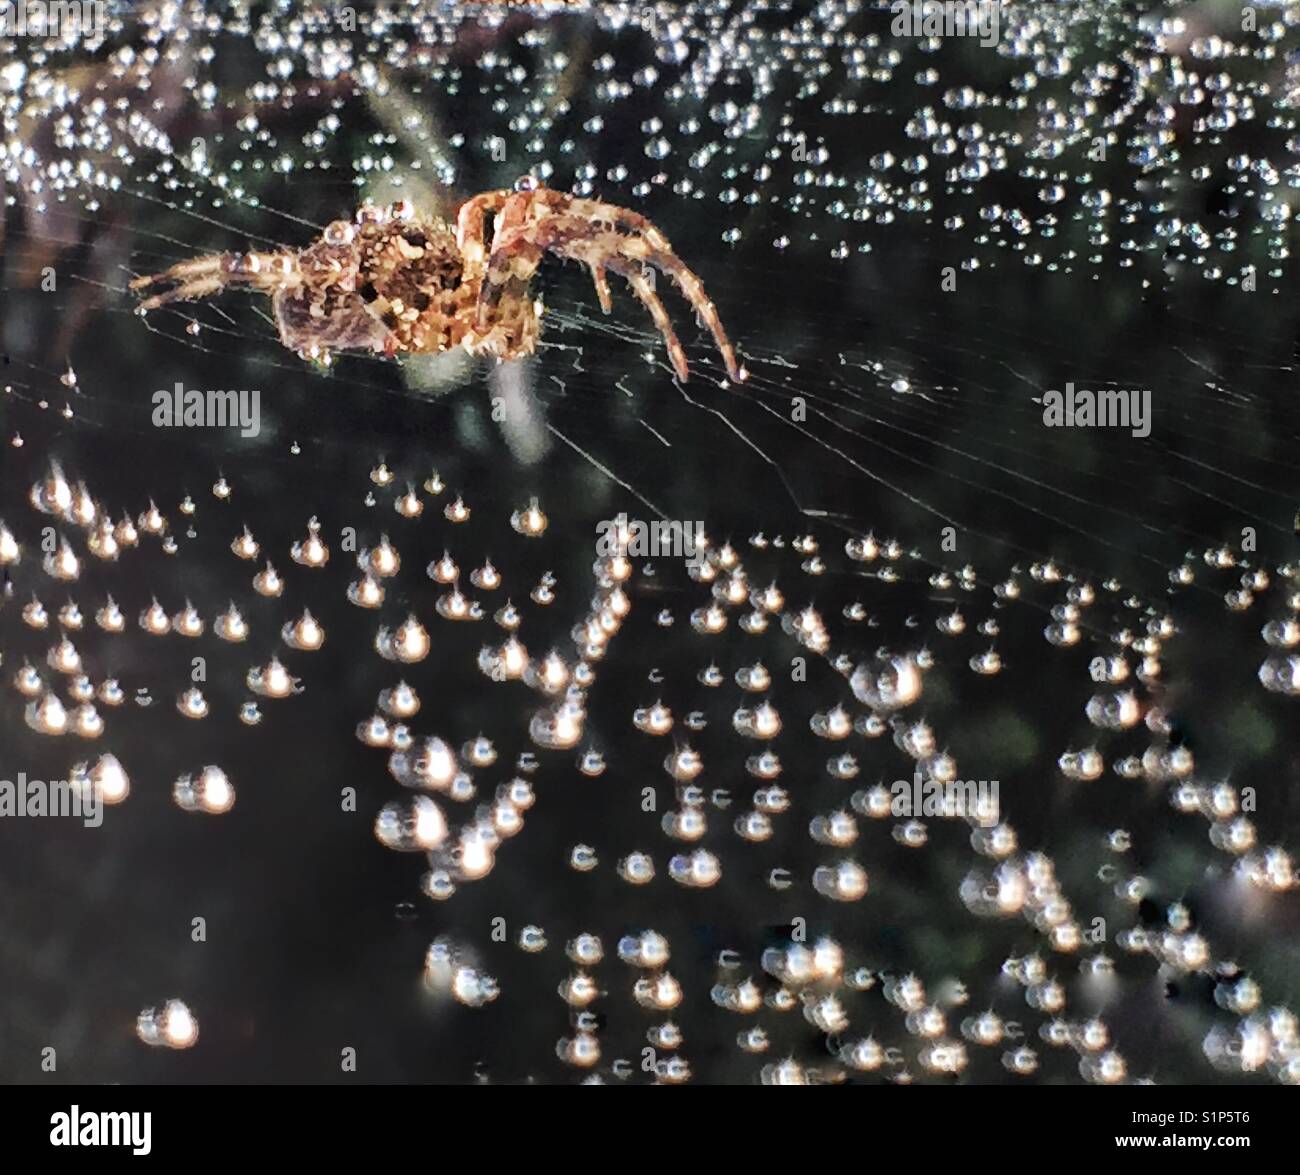 Spider in its web. Stock Photo